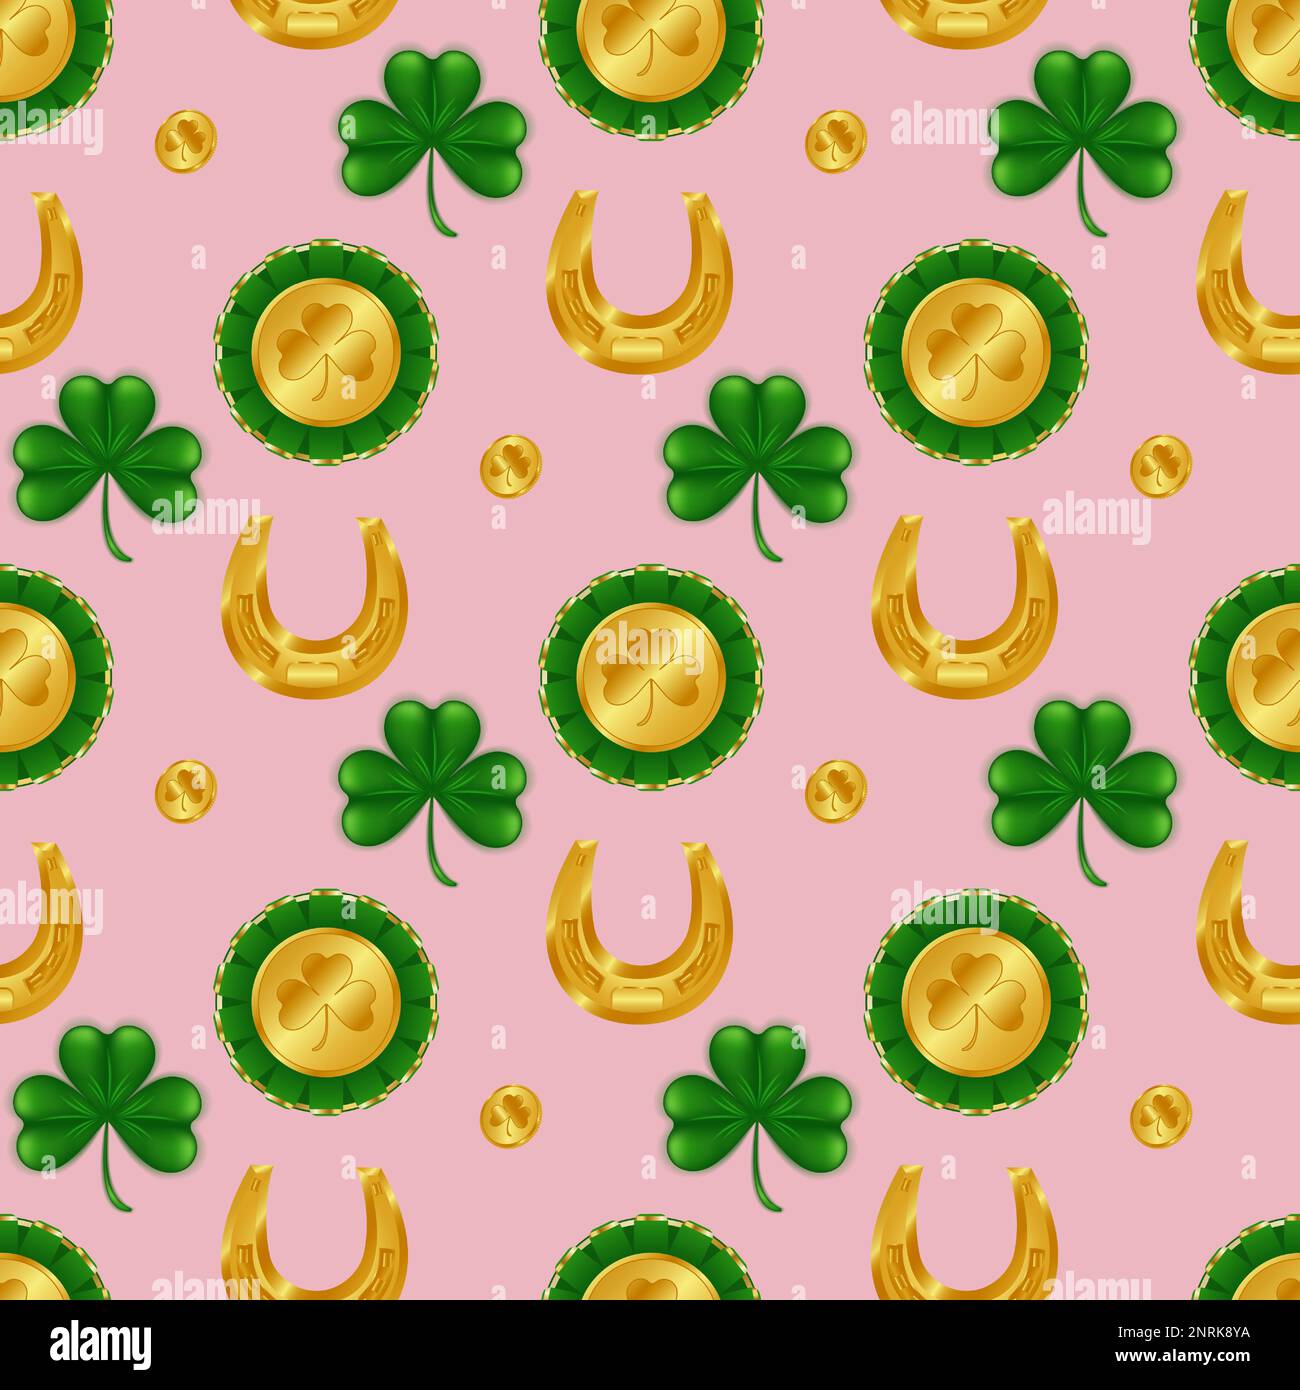 Celebrate St. Patrick's Day in style with this seamless pattern featuring a lucky golden horseshoe, coins, clover shamrock, and a shiny gold medal. Pe Stock Vector